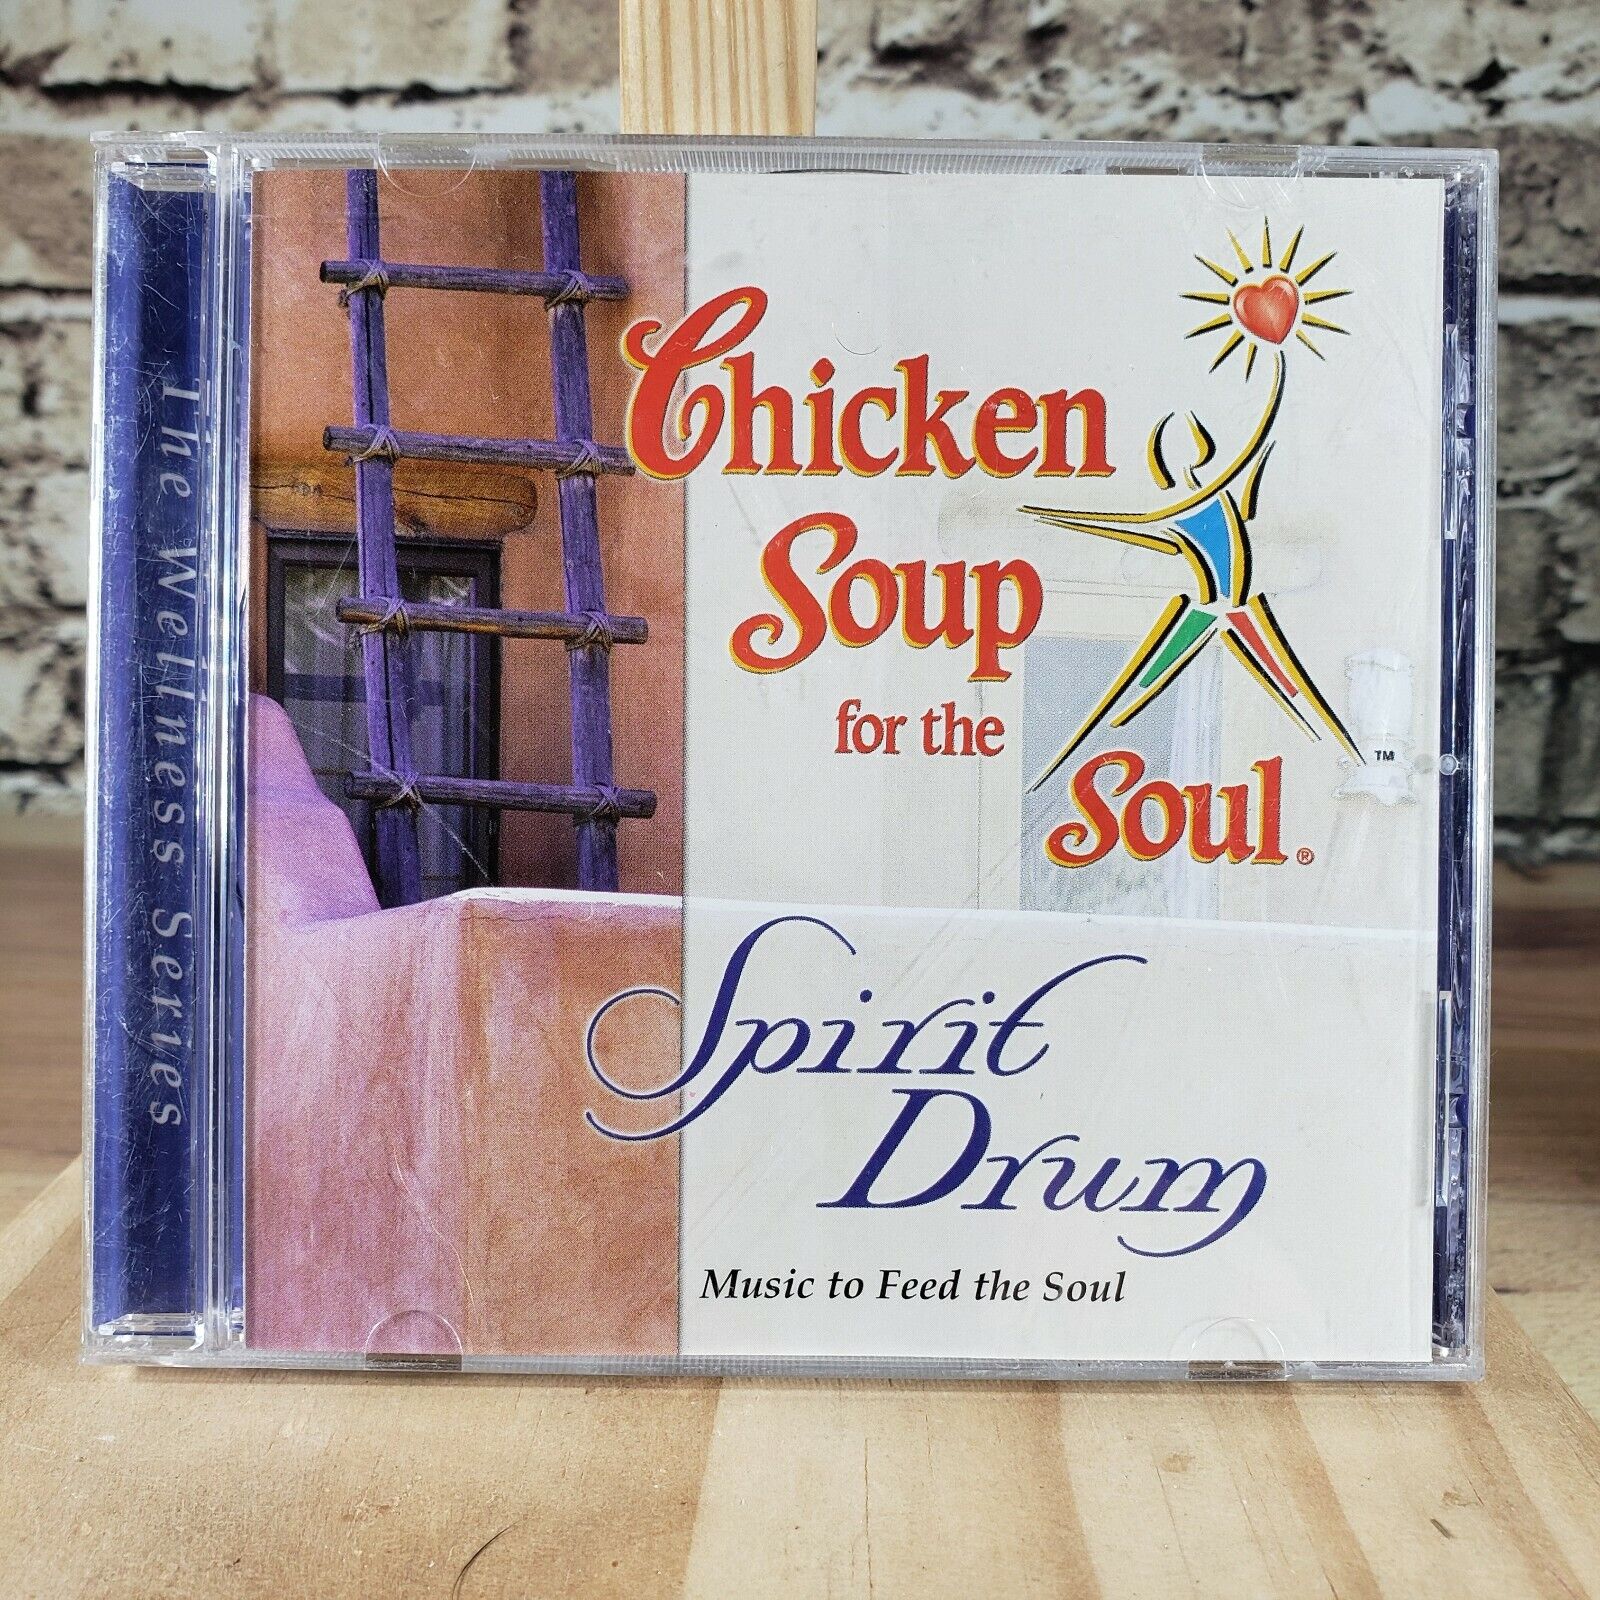 Chicken soup for the soul spirit drum cd